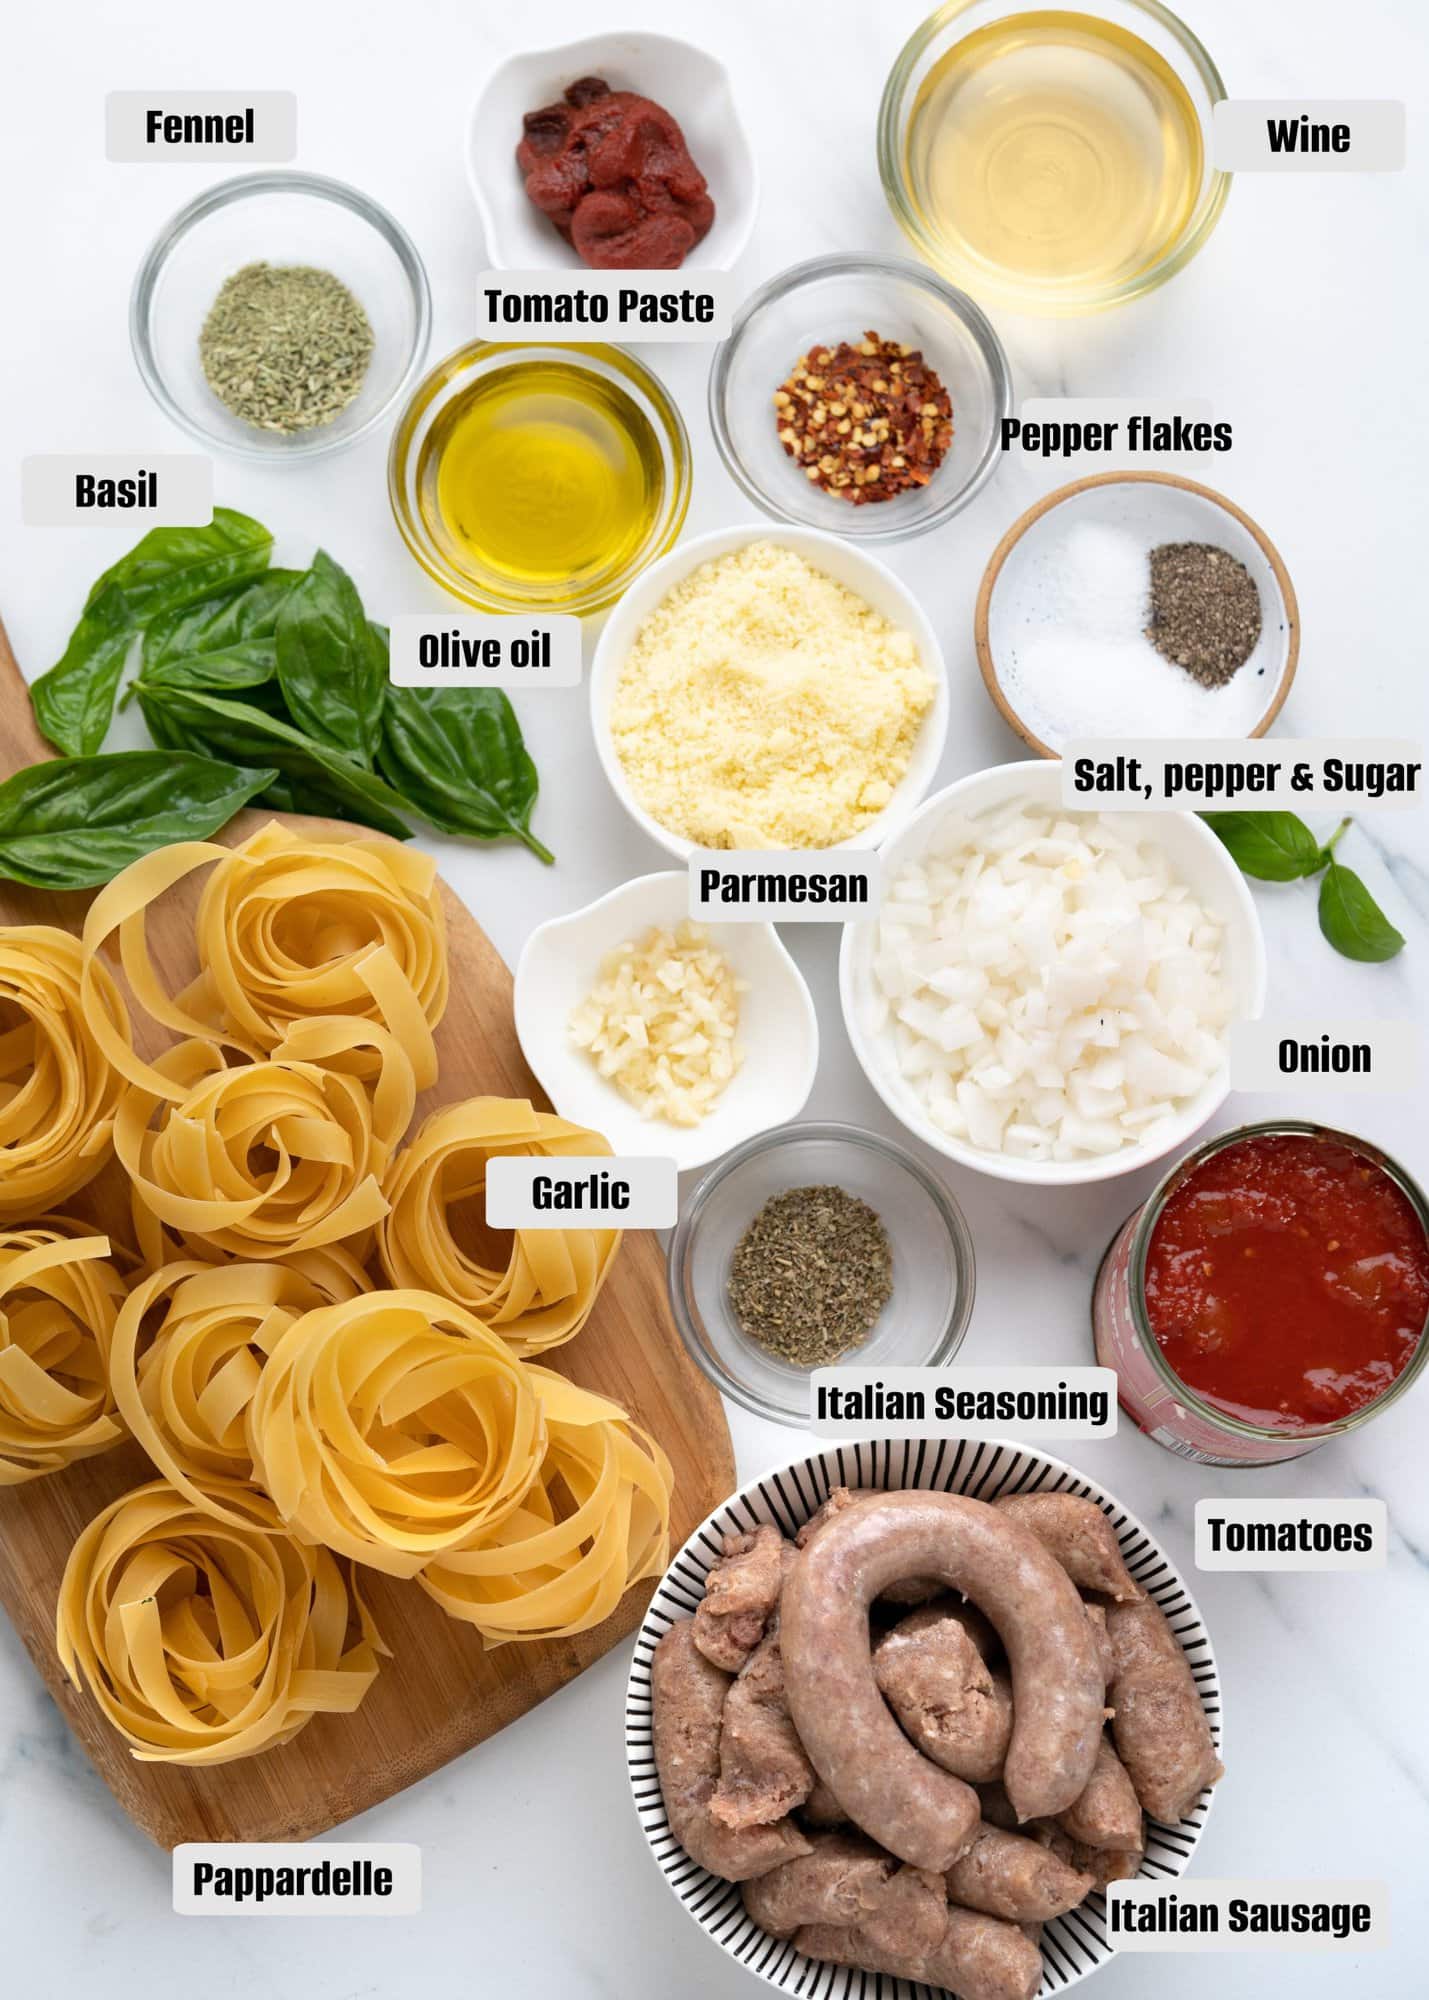 List of ingredients for Pappardelle Pasta with Italian Sausage.